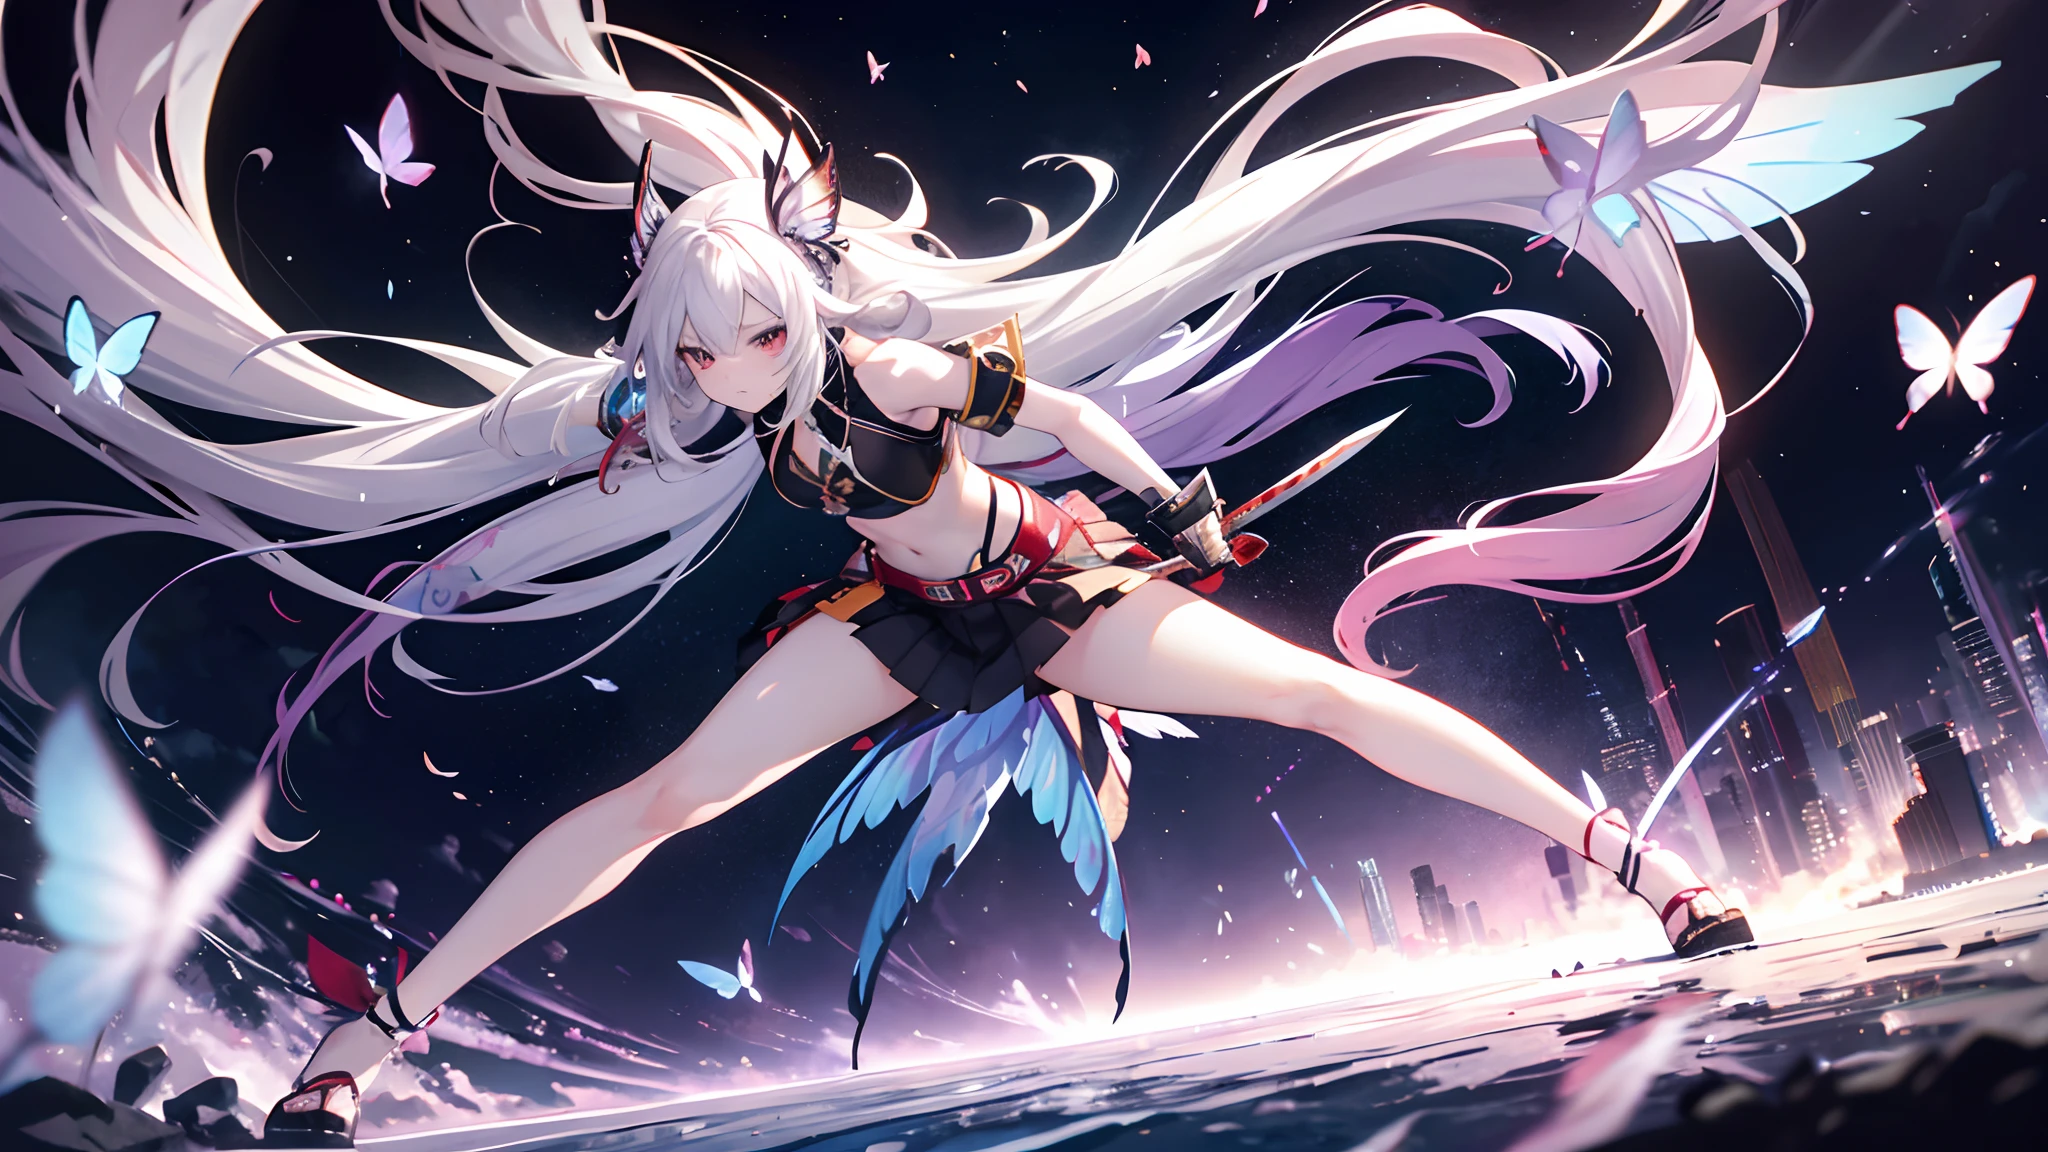 multicolor palette, explosion of colors, anime girl, very long white hair, low angle shot, with very sharp sword, fighting pose, cinematic, floating light particle, sexy clothes, ethereal butterflies, showing midriff, showing thighs